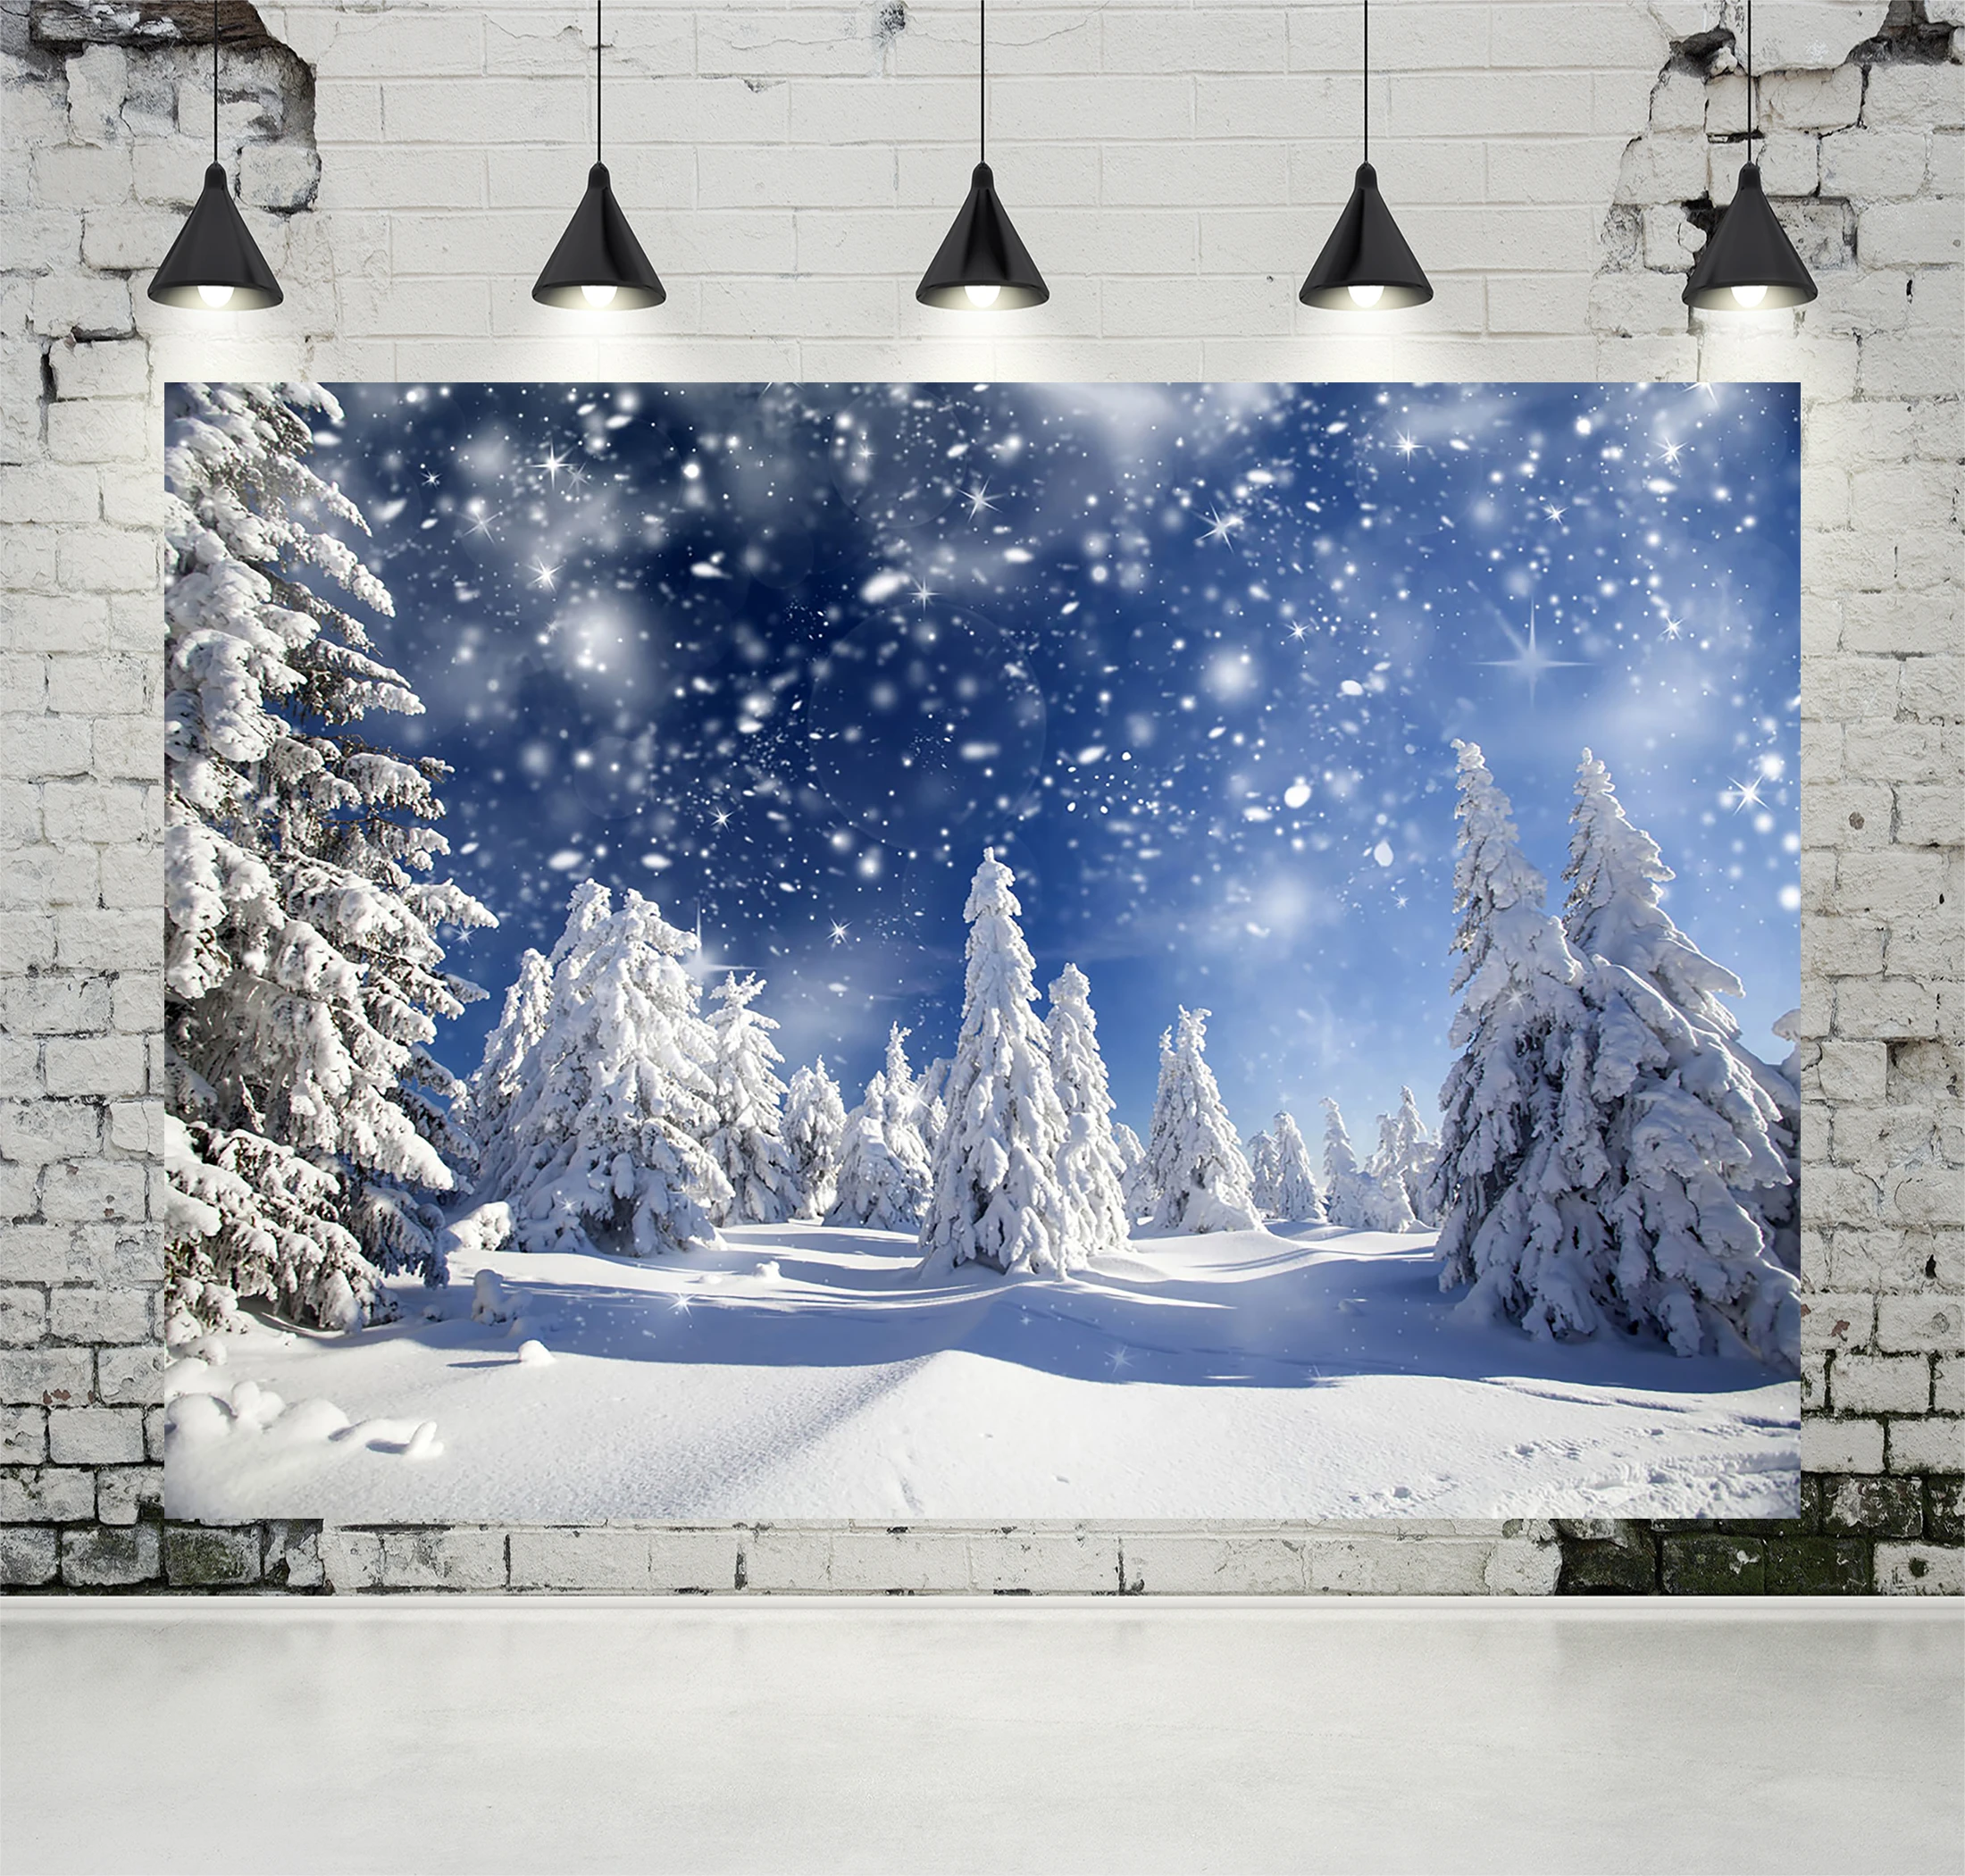 Photography Backdrop Winter Frozen Forest Snow Christmas Background Photo Studio